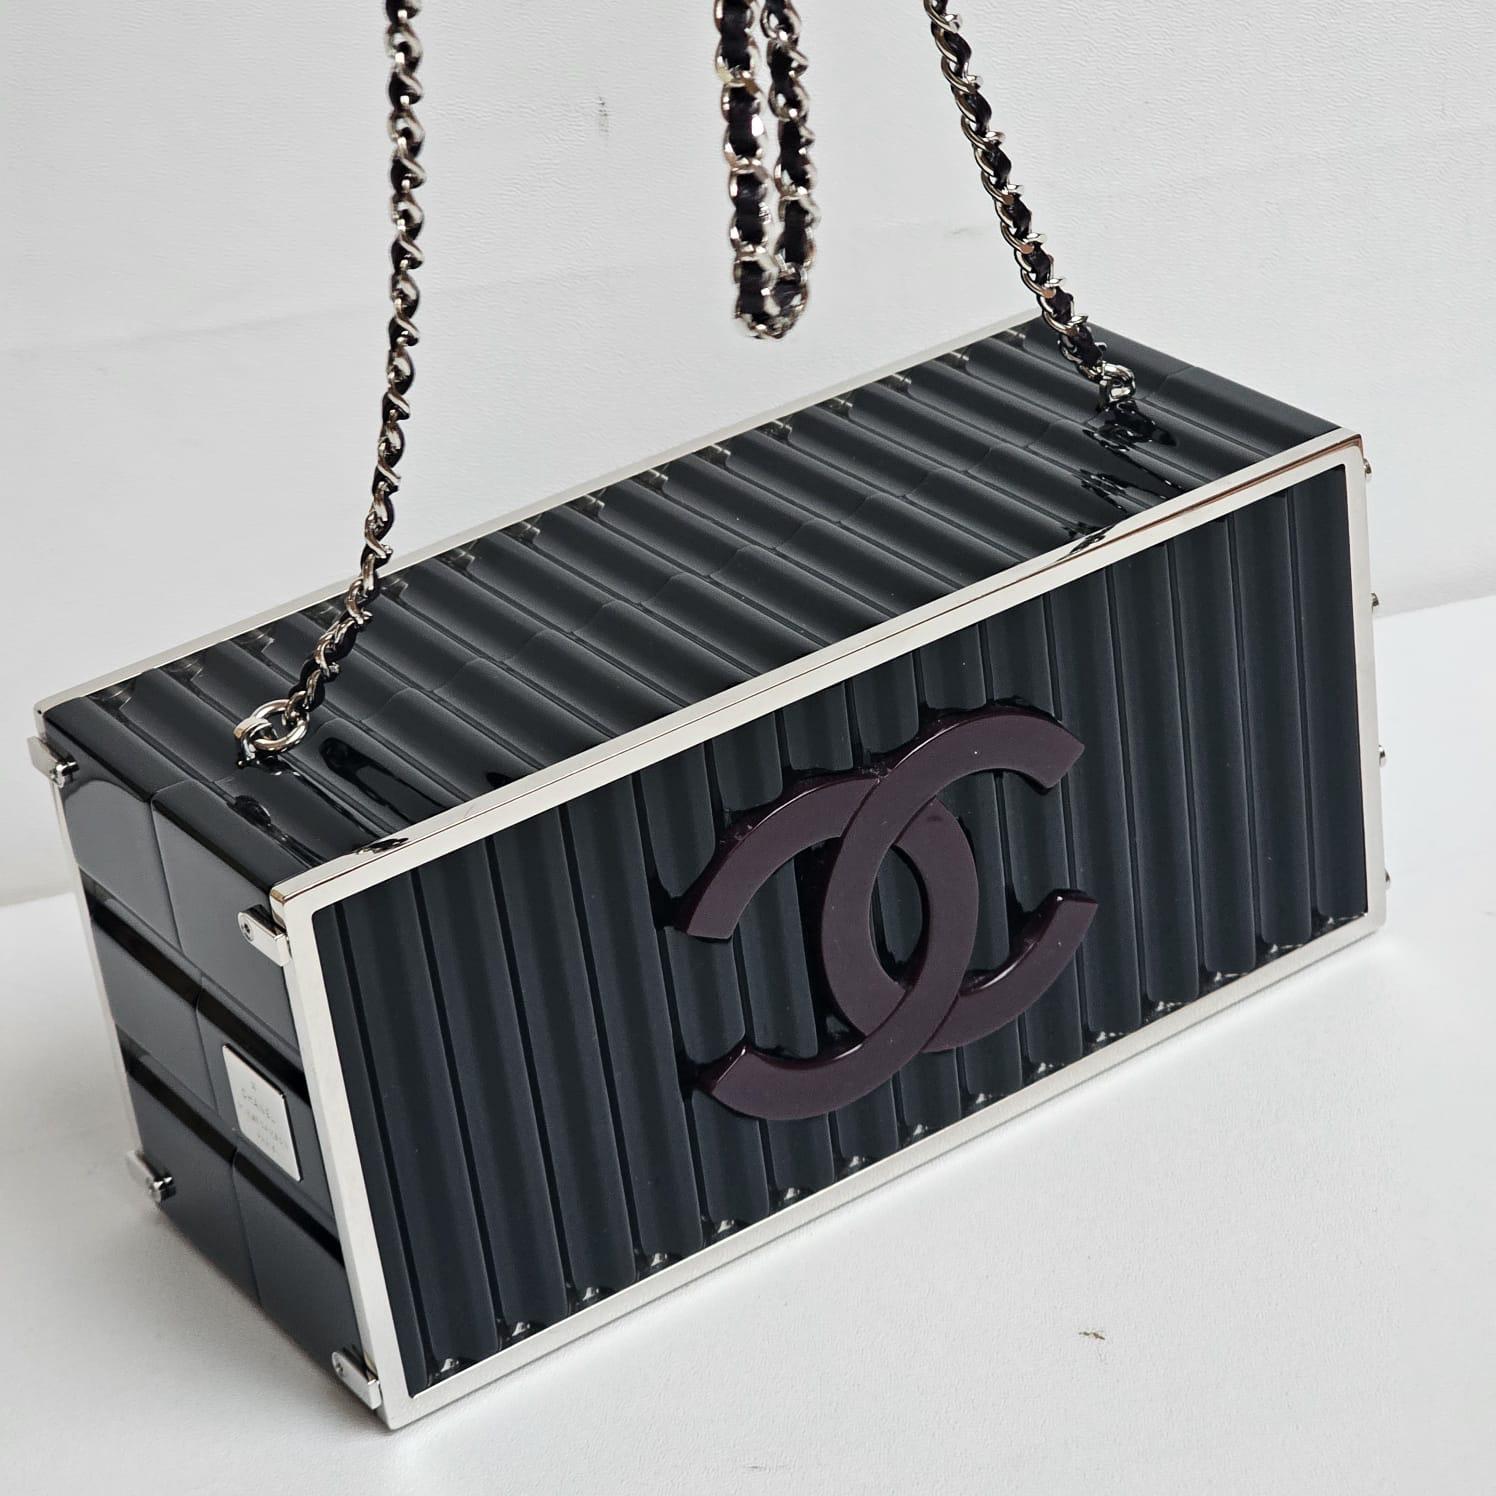 Rare Chanel Minaudiere Black Shipping Container Bag In Excellent Condition For Sale In Jakarta, Daerah Khusus Ibukota Jakarta